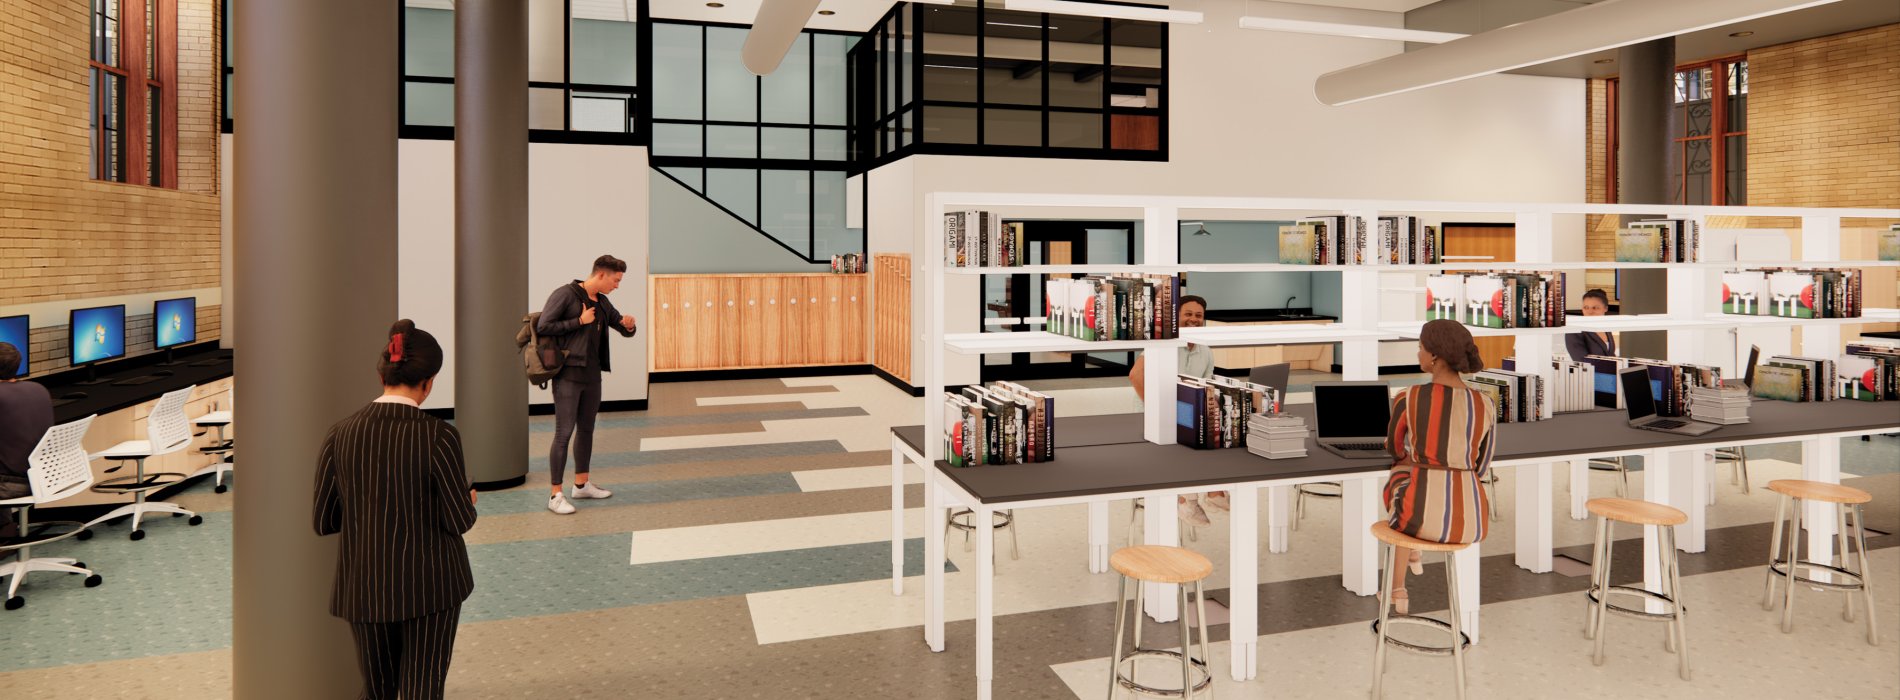 Rendering of the maker space in the College of Engineering and Applied Sciences building at UAlbany.